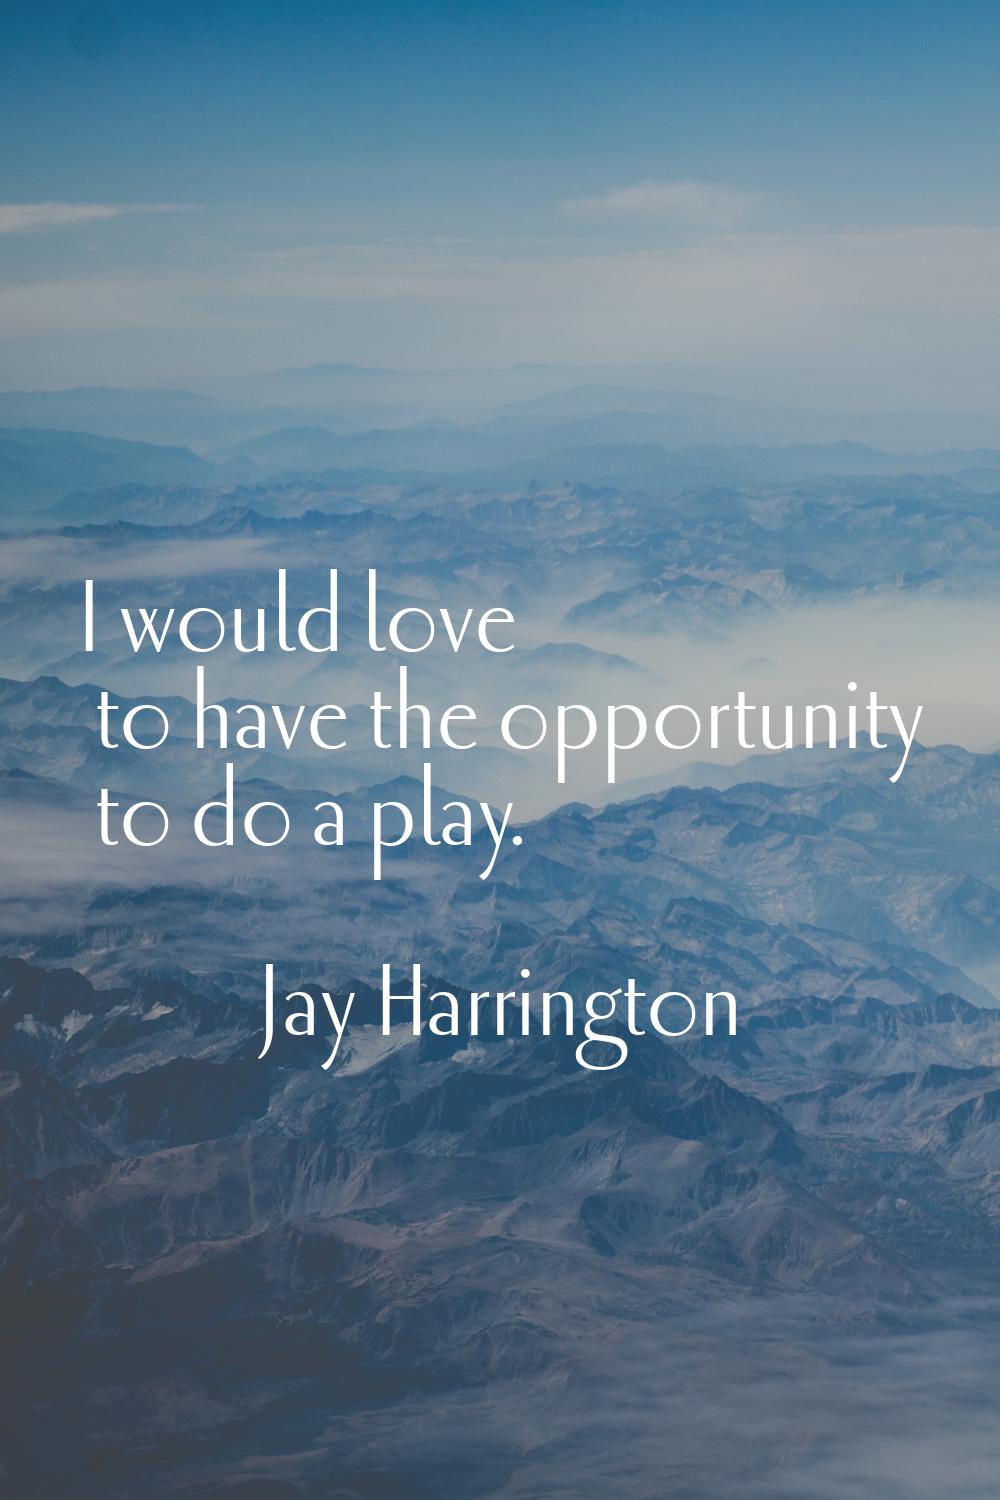 I would love to have the opportunity to do a play.